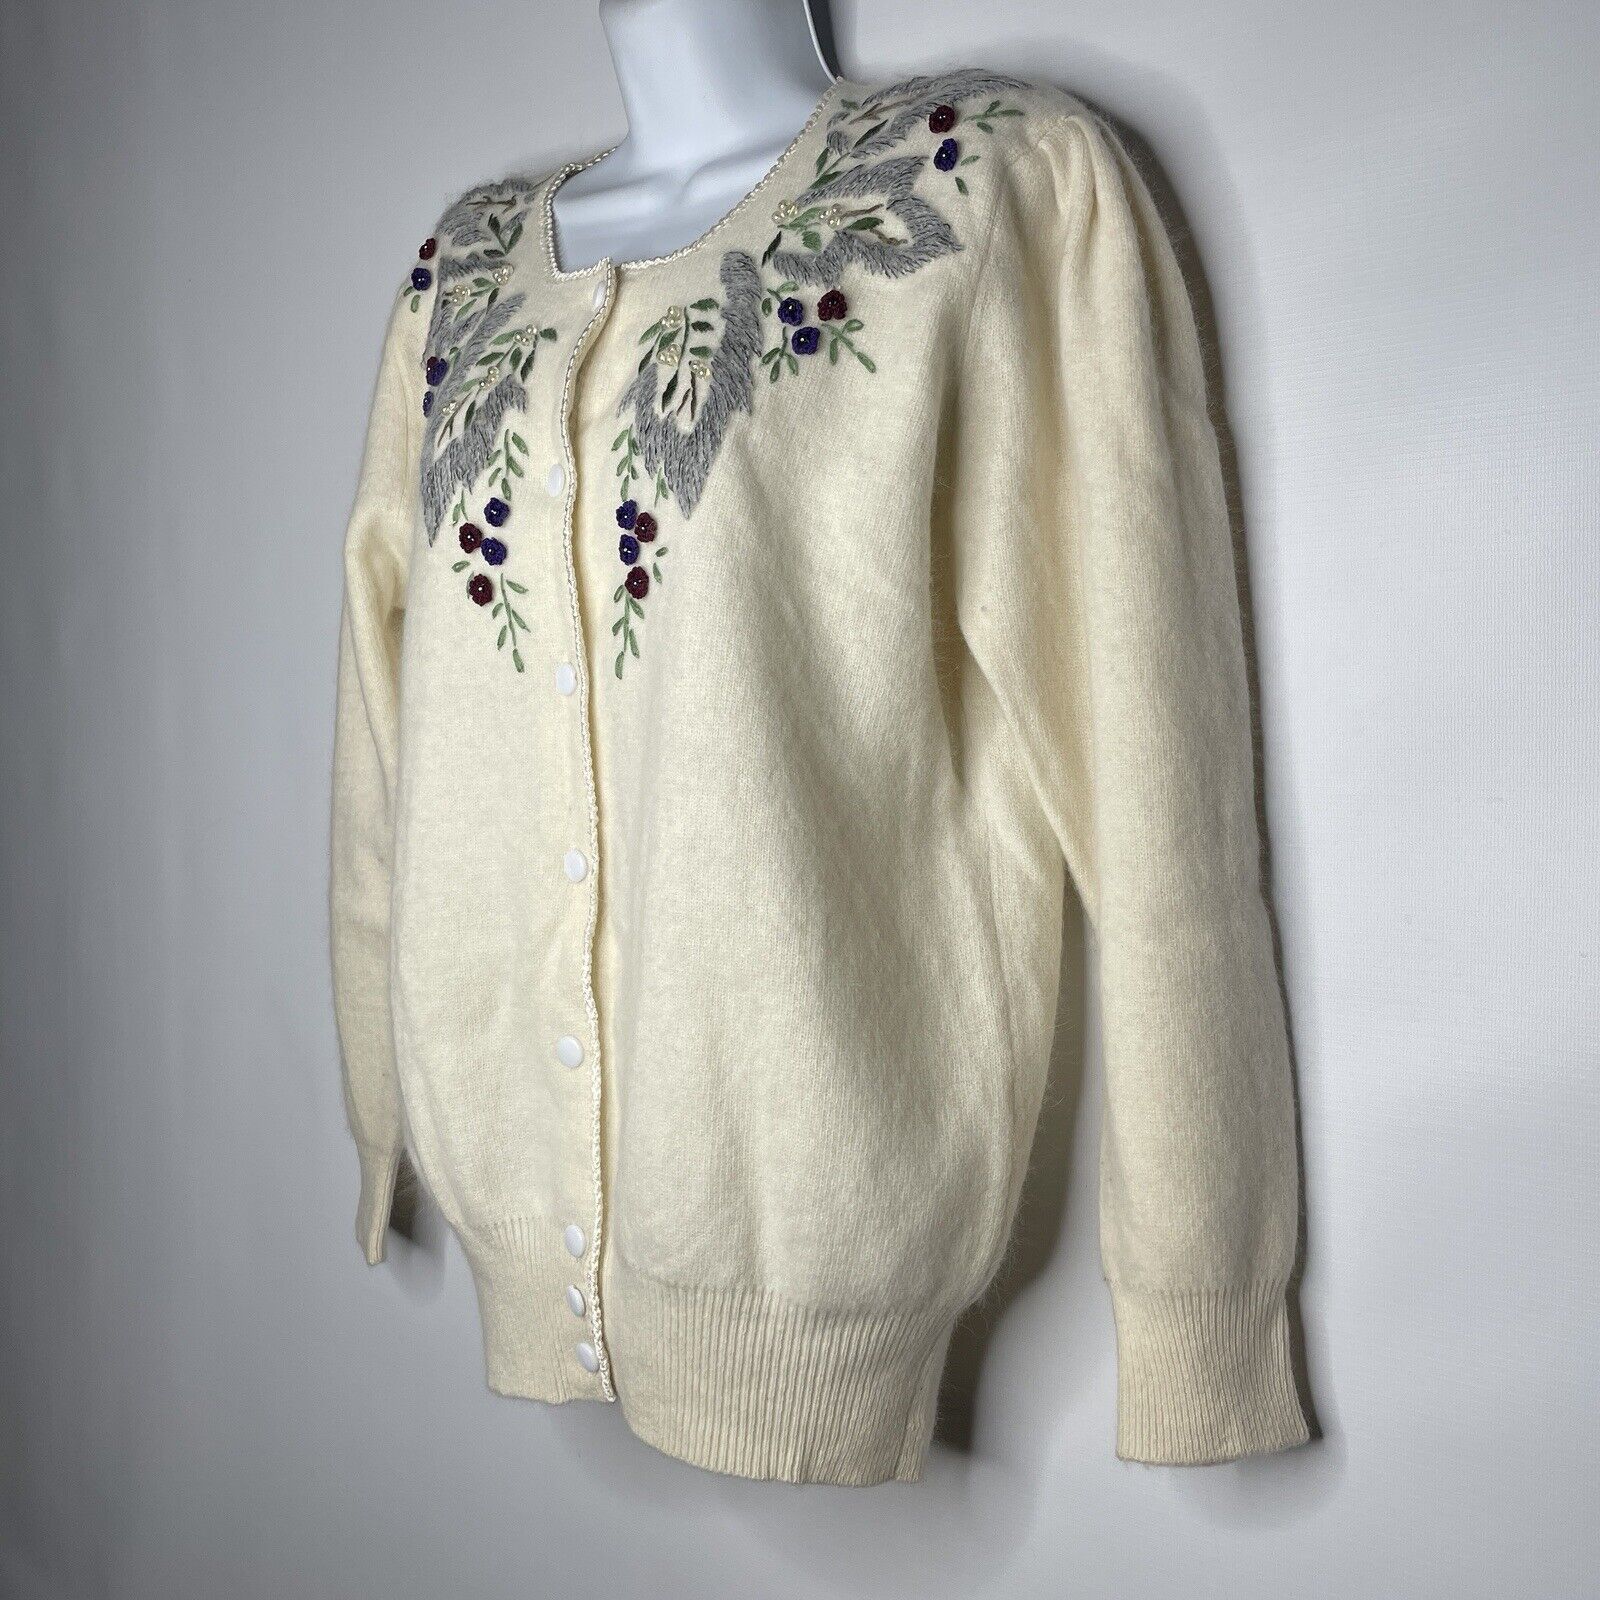 Vintage 80s Ivory Floral Embroidered Beaded Fuzzy Cardigan Sweater Size L / US 10 / IT 46 - 6 Thumbnail